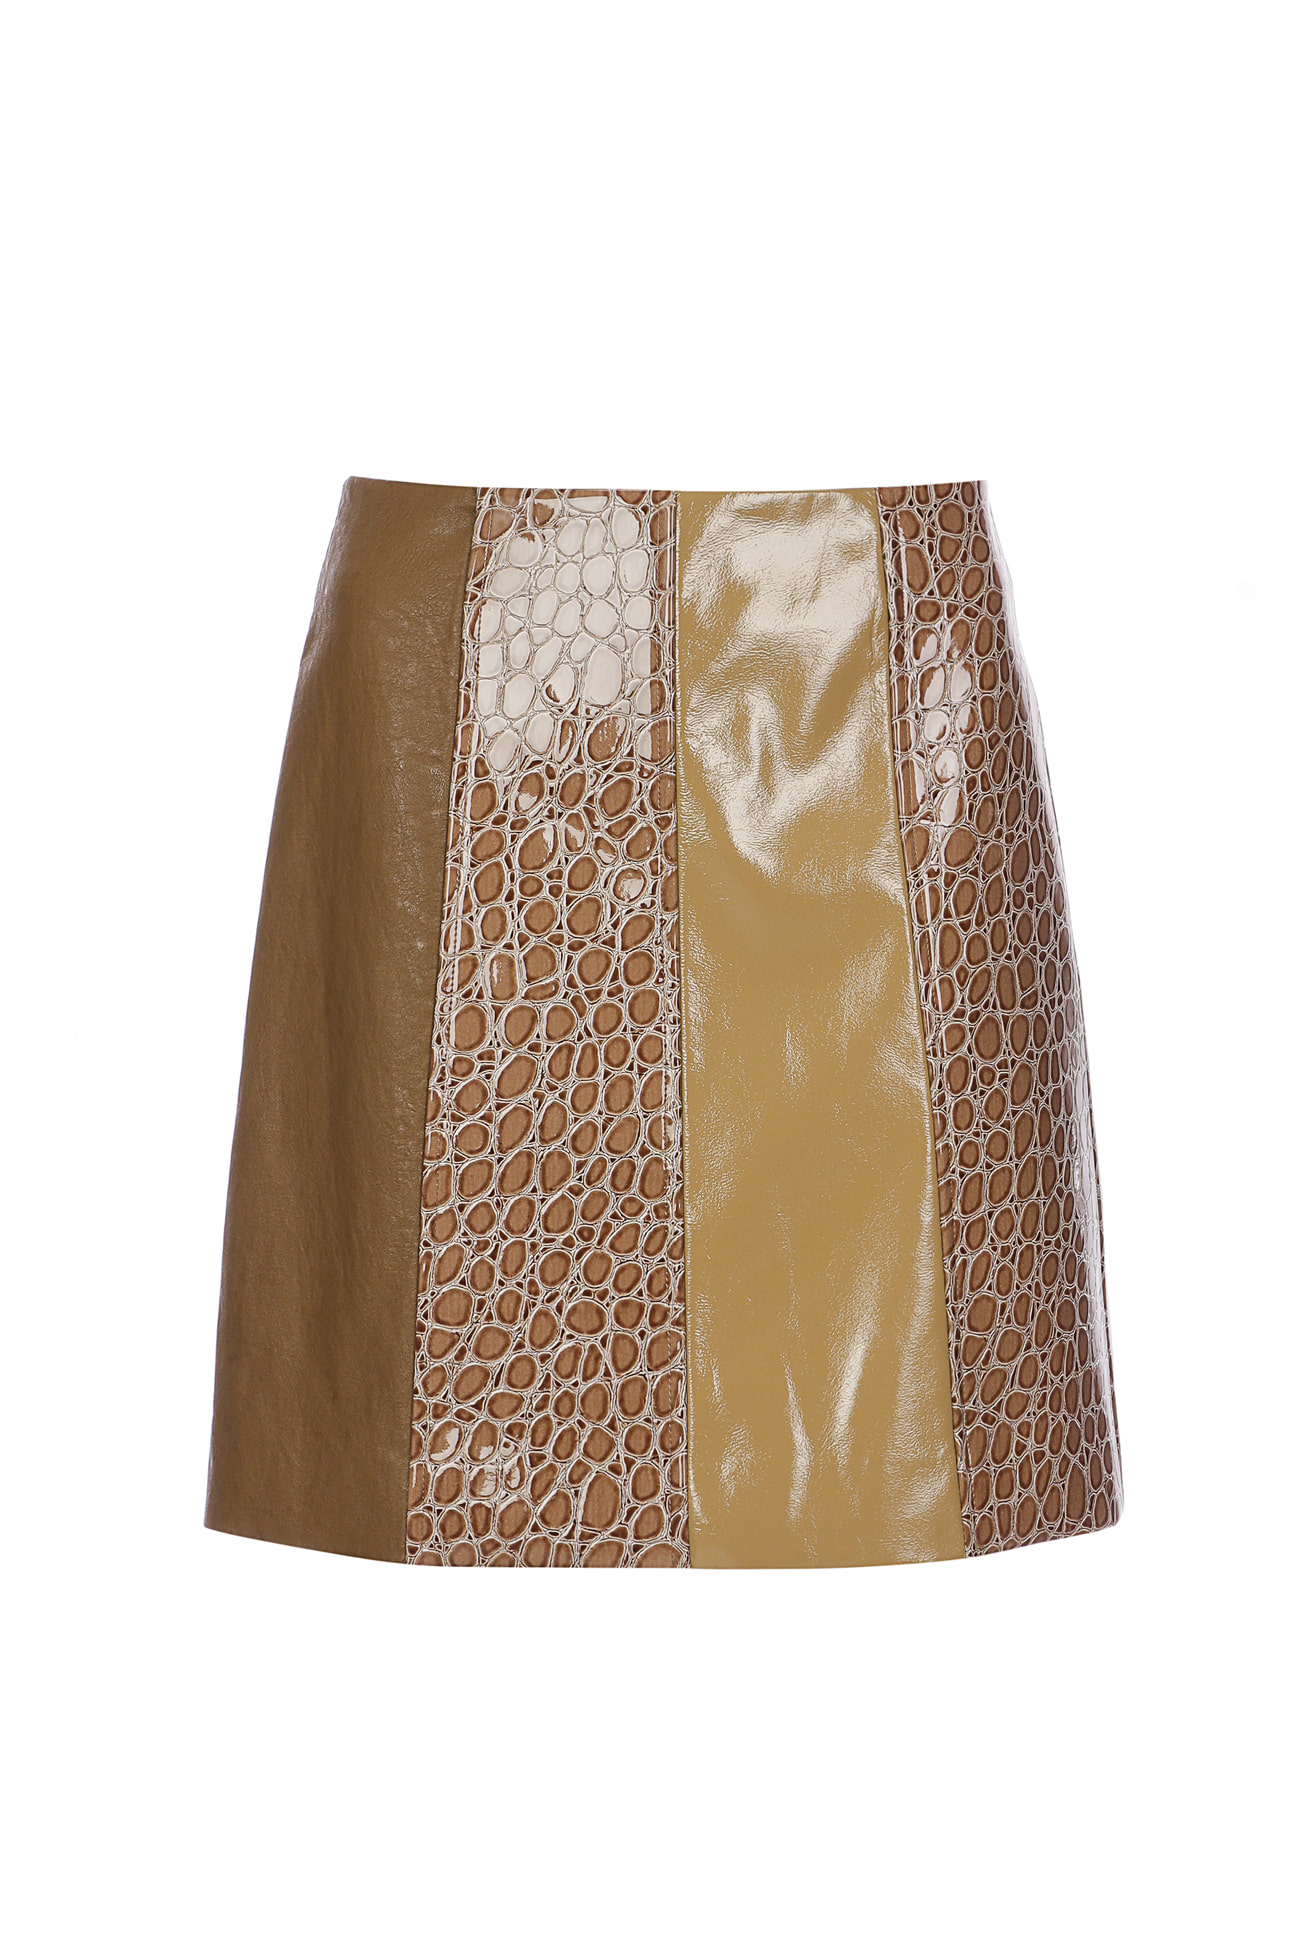 HIGH QUALITY LINE - Brown Mix Faux Leather Skirt